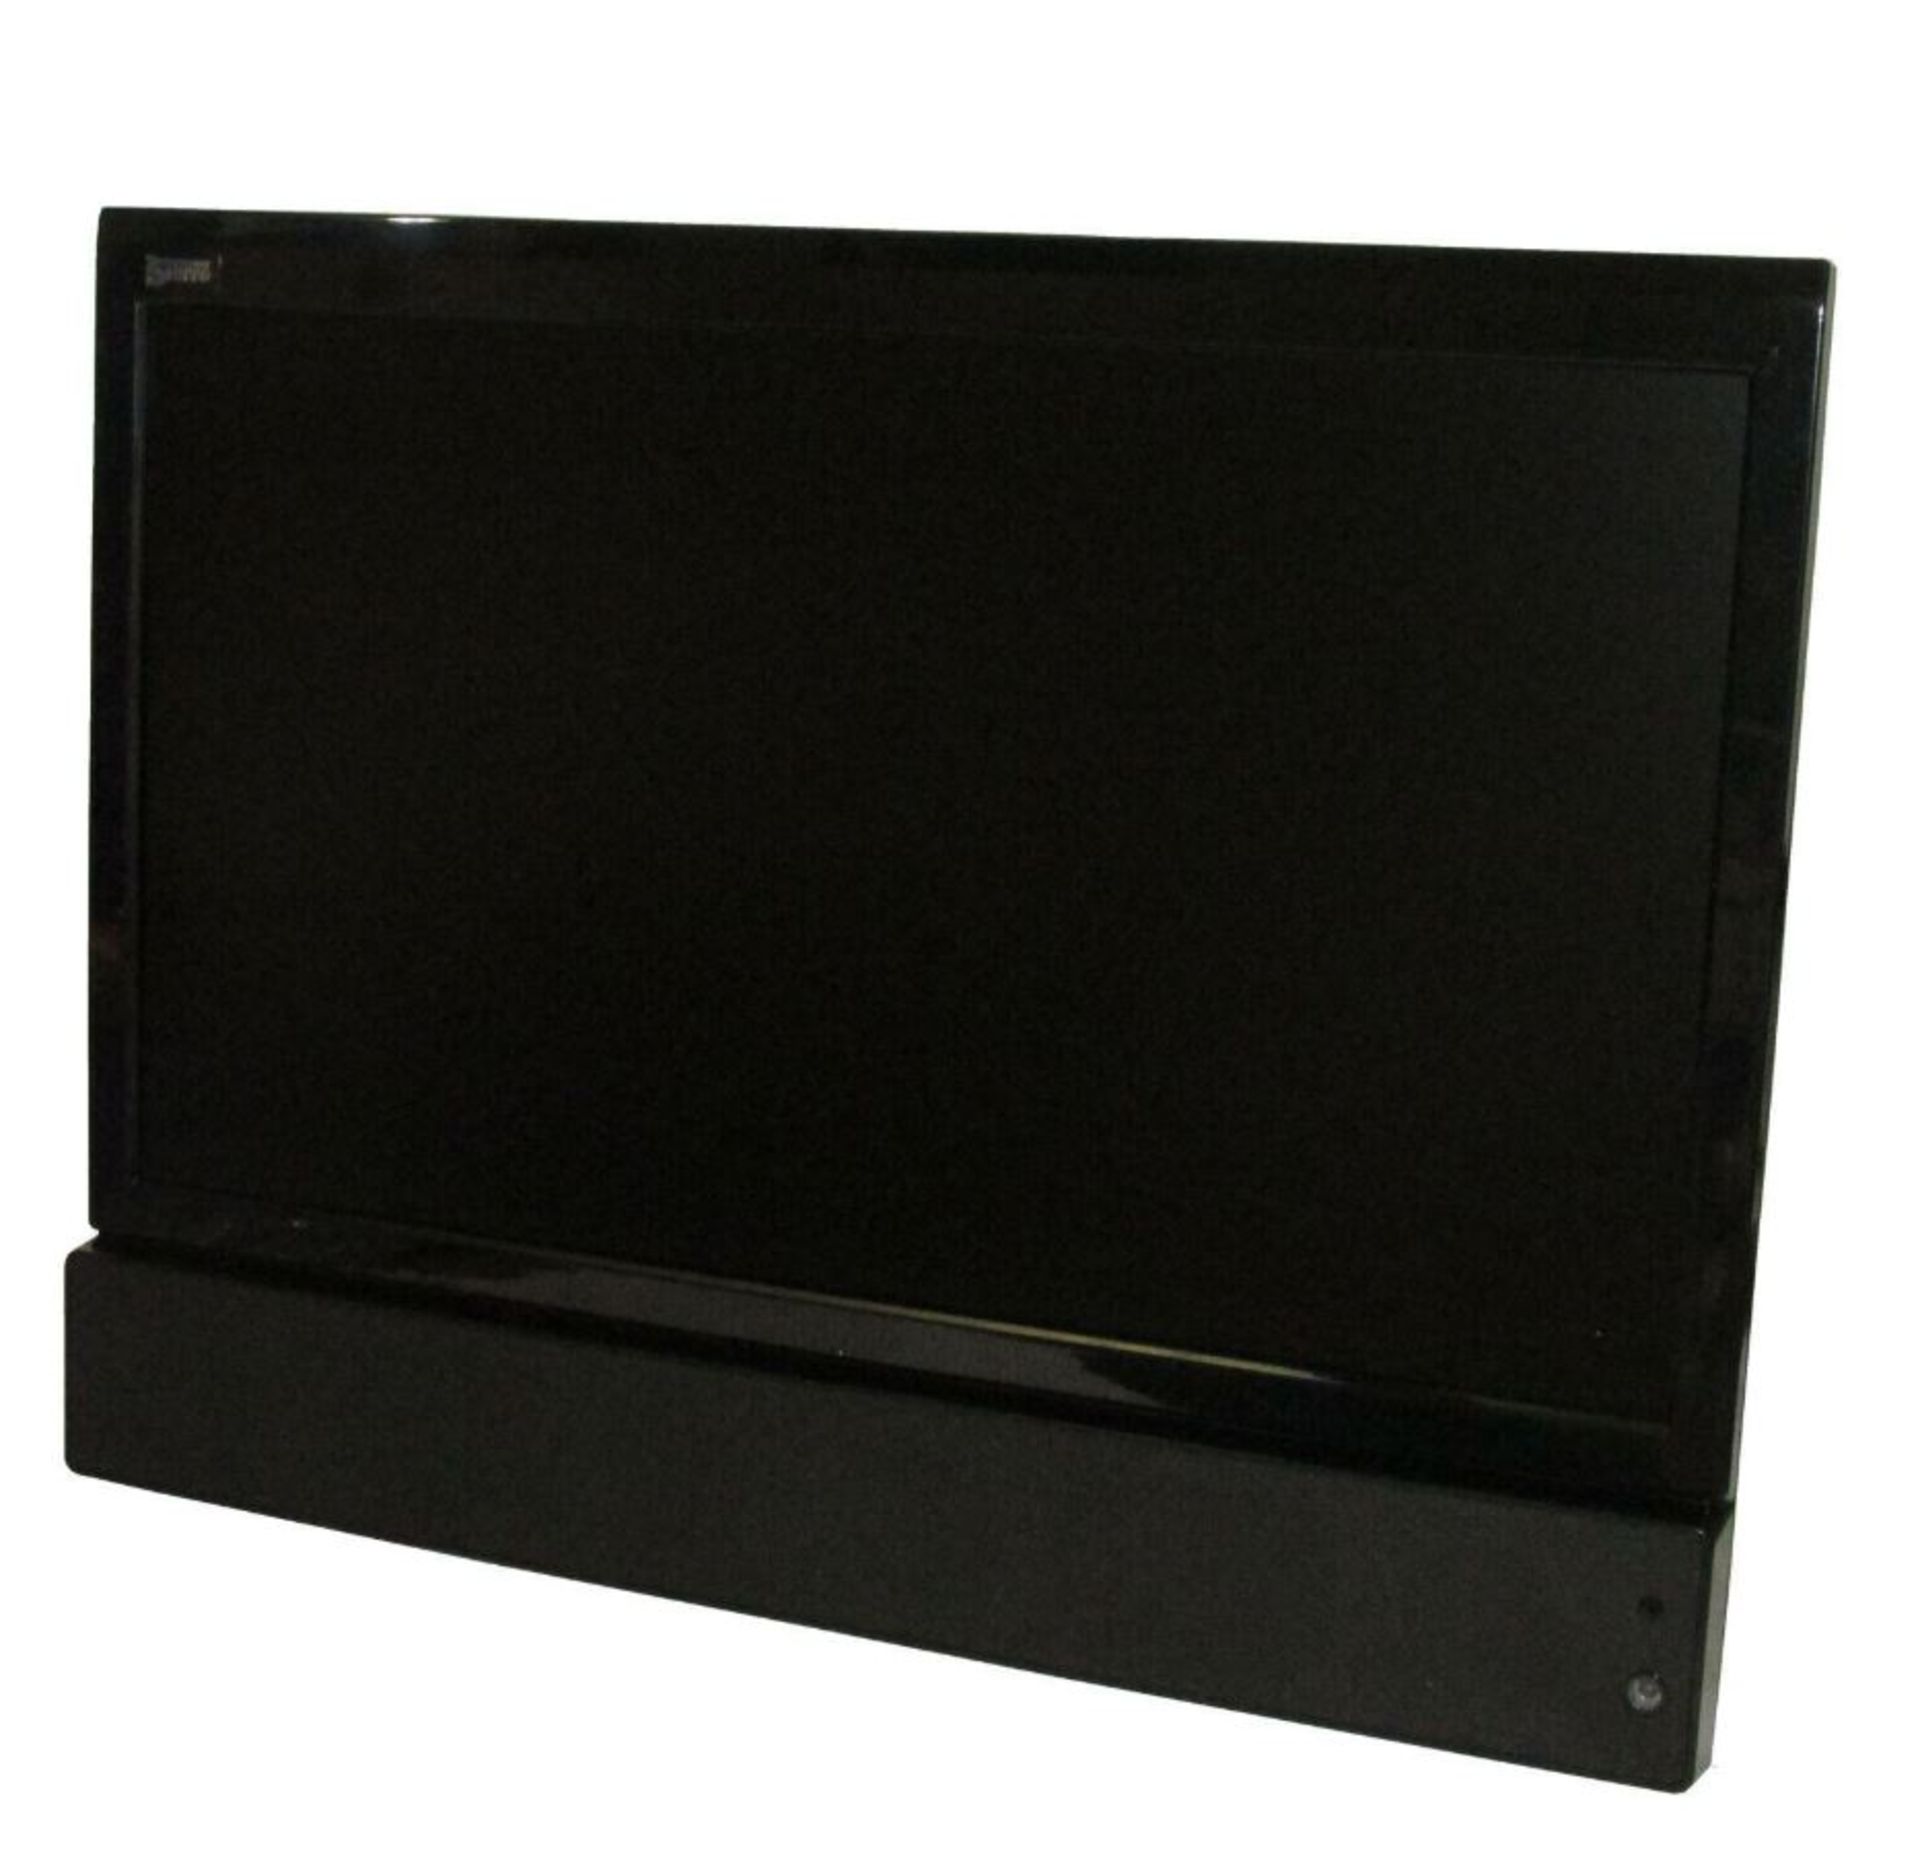 10 X 19" Sound Bar Tv And Dvd Combo (Zzlwtv19) - Image 2 of 2